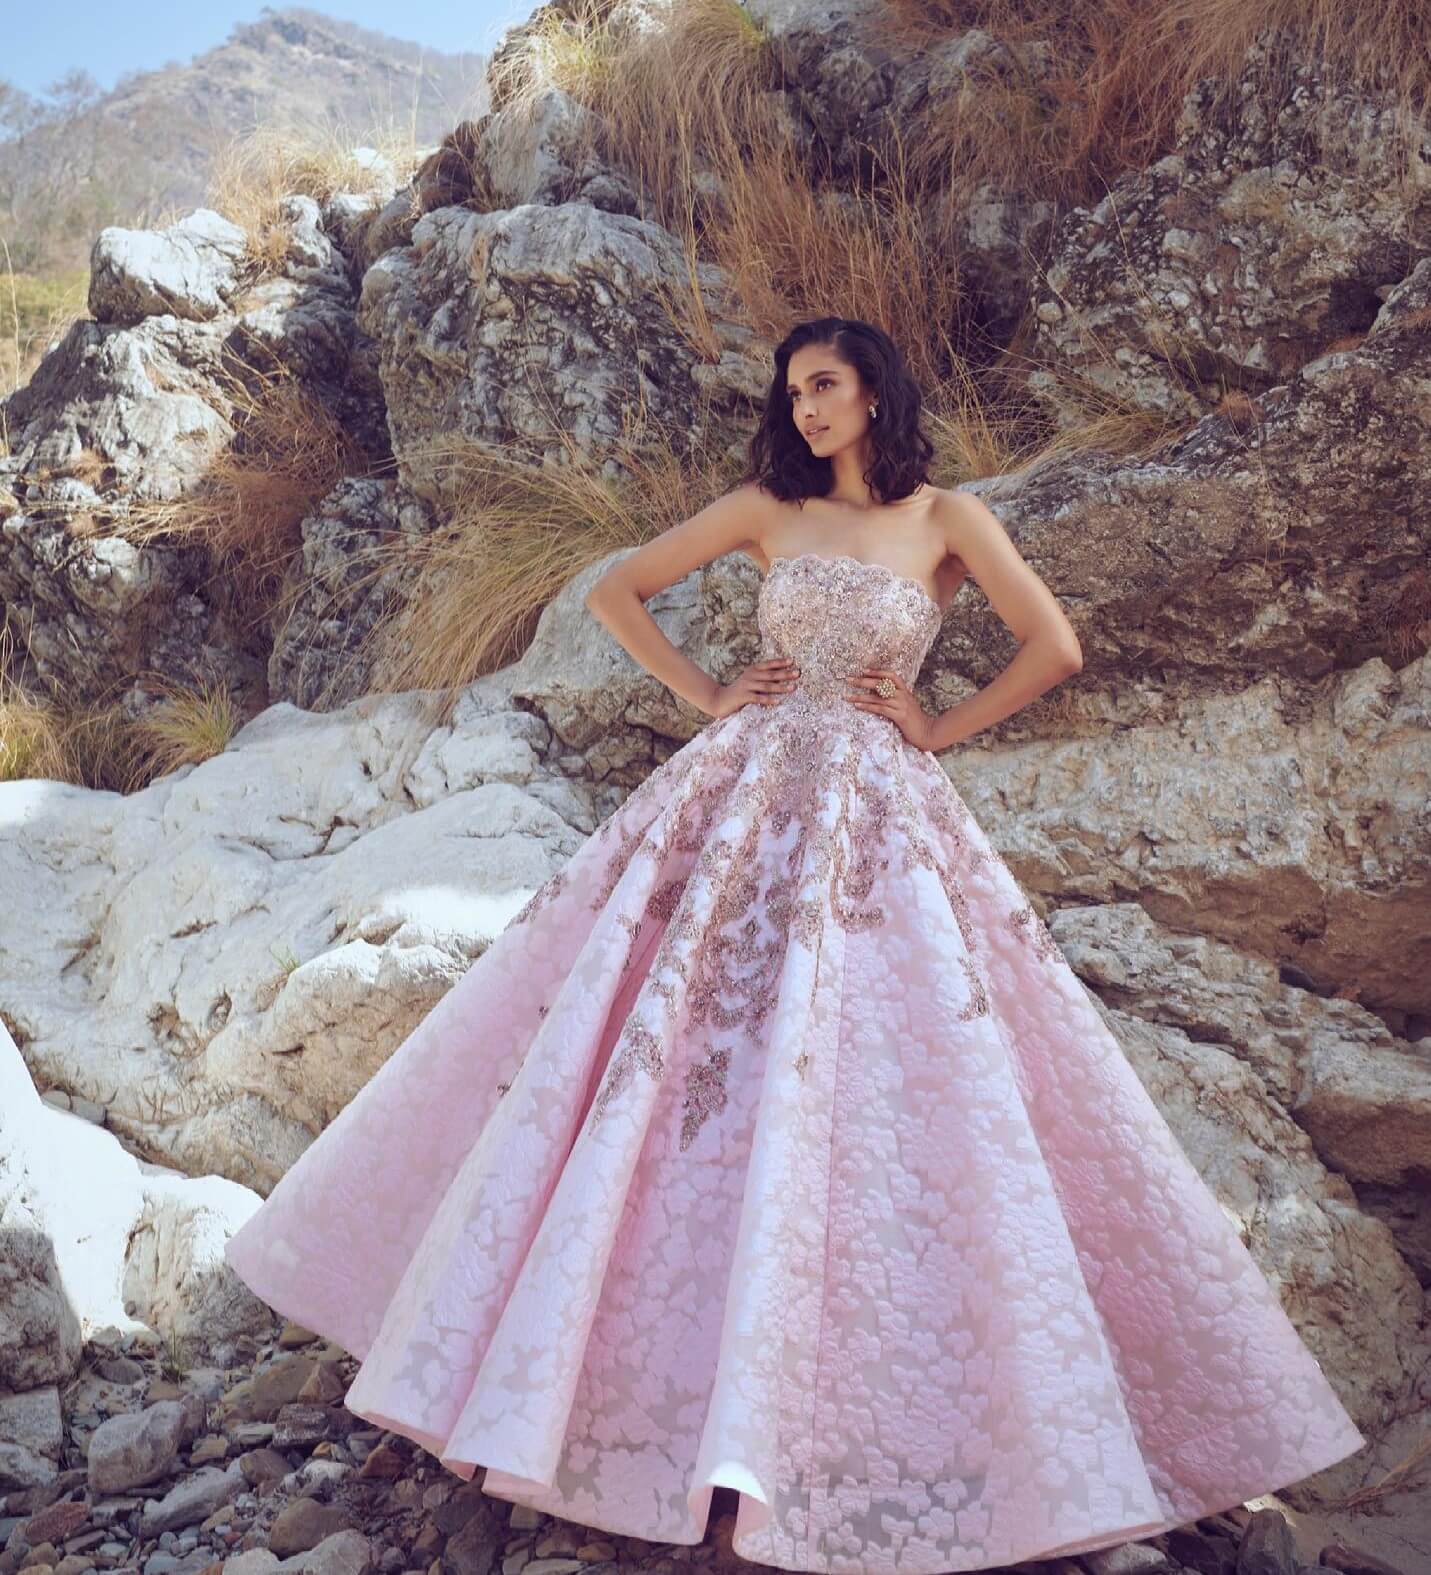 Dayana Erappa Gives Us Princess Vibes In Pink Off-Shoulder Fit & Flare Gown Quirky Outfits Looks